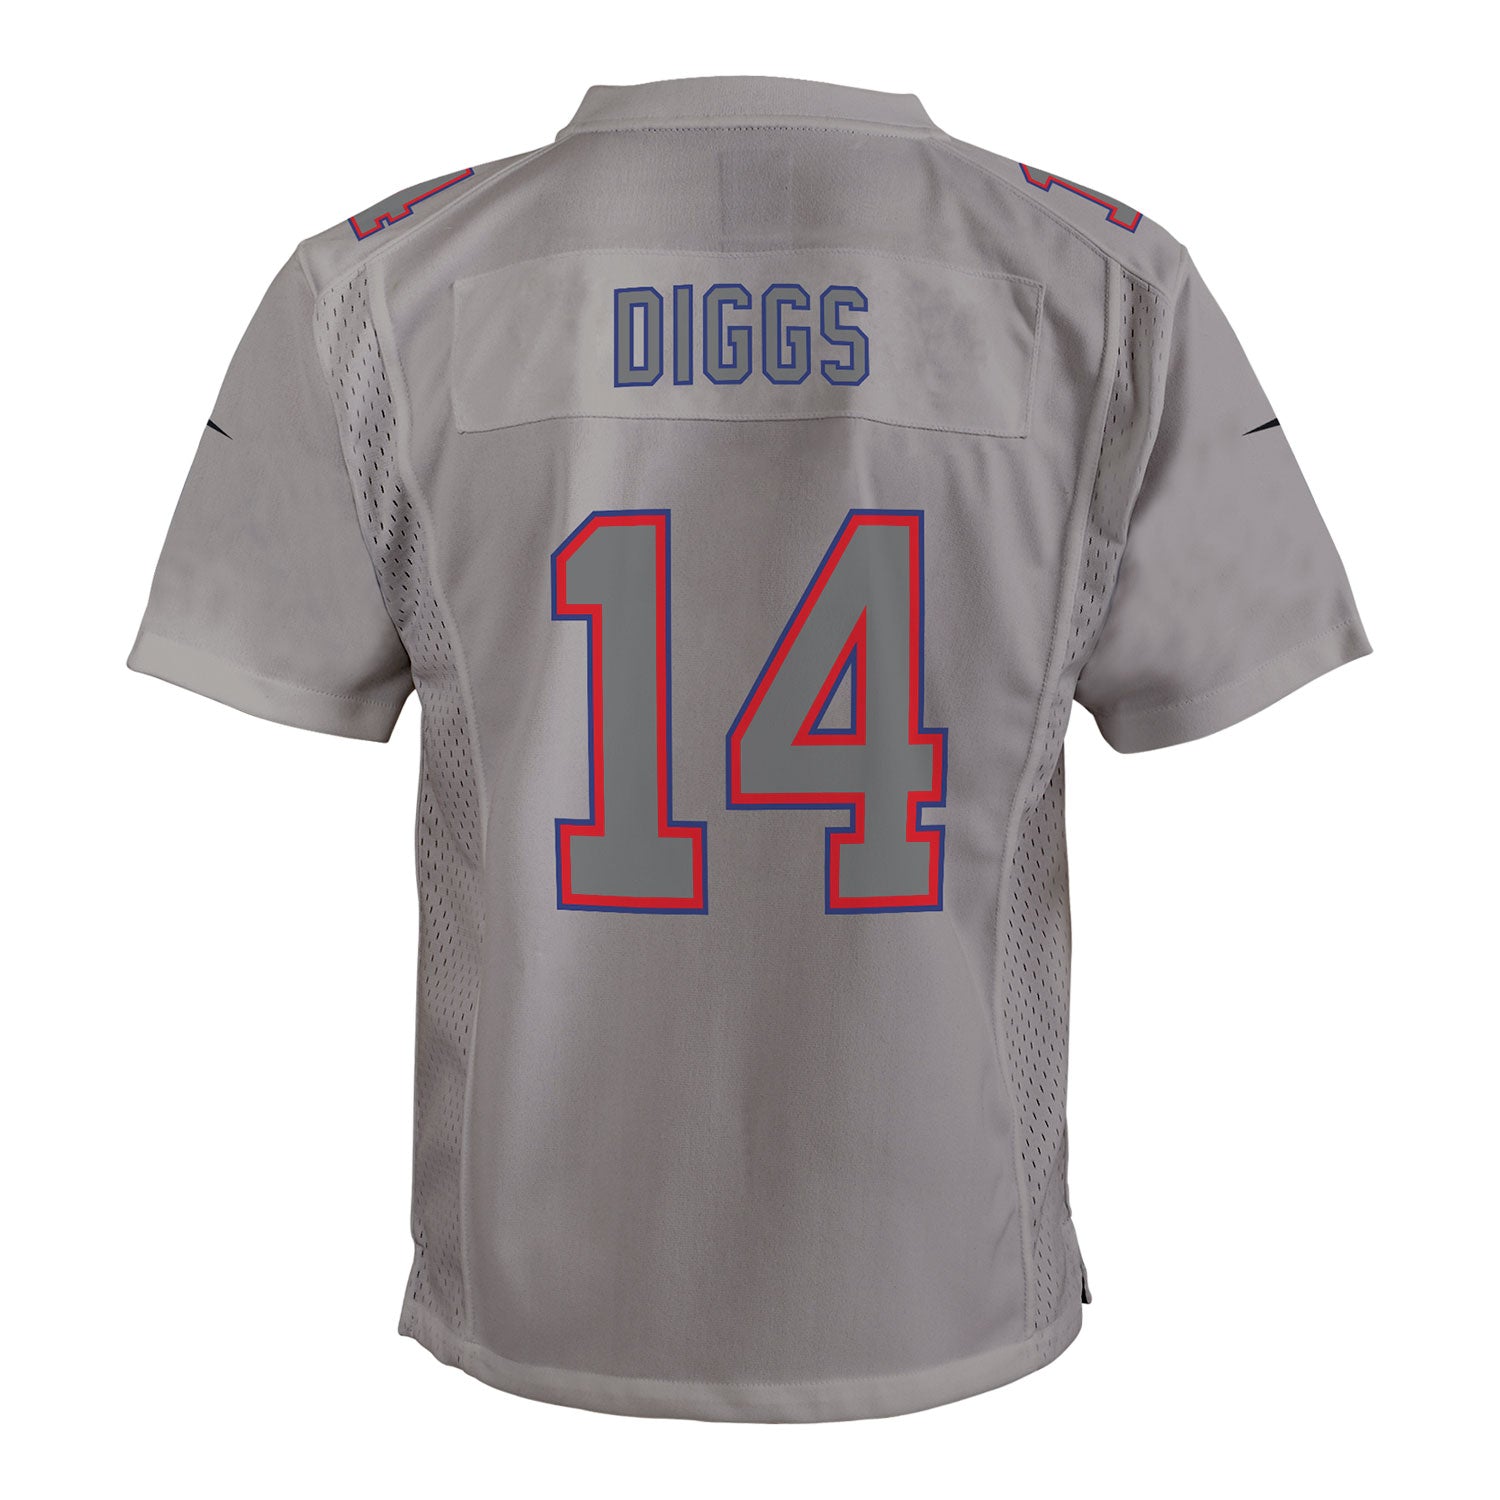  Stefon Diggs Youth Jersey